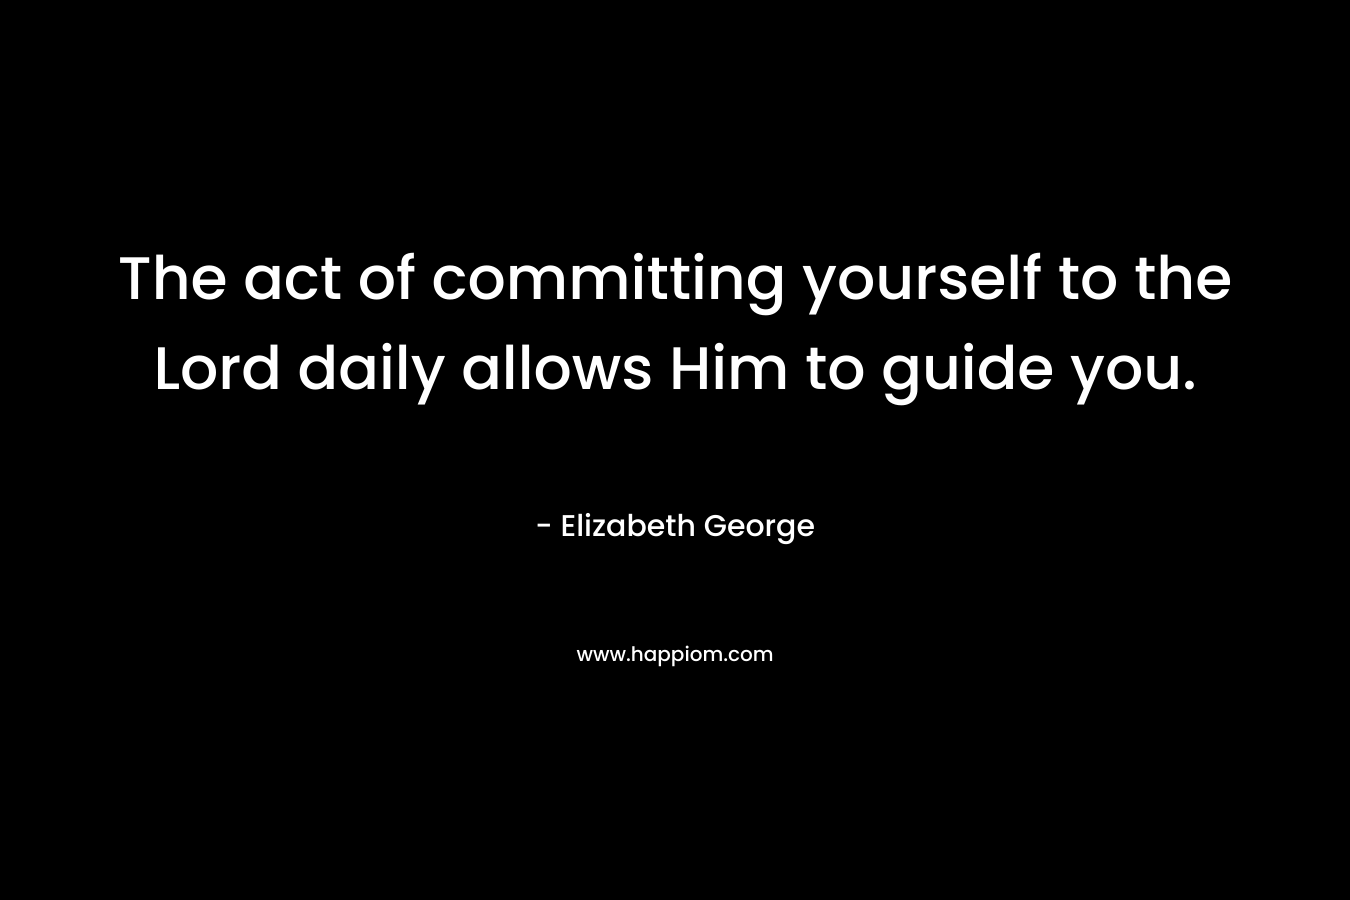 The act of committing yourself to the Lord daily allows Him to guide you. – Elizabeth George